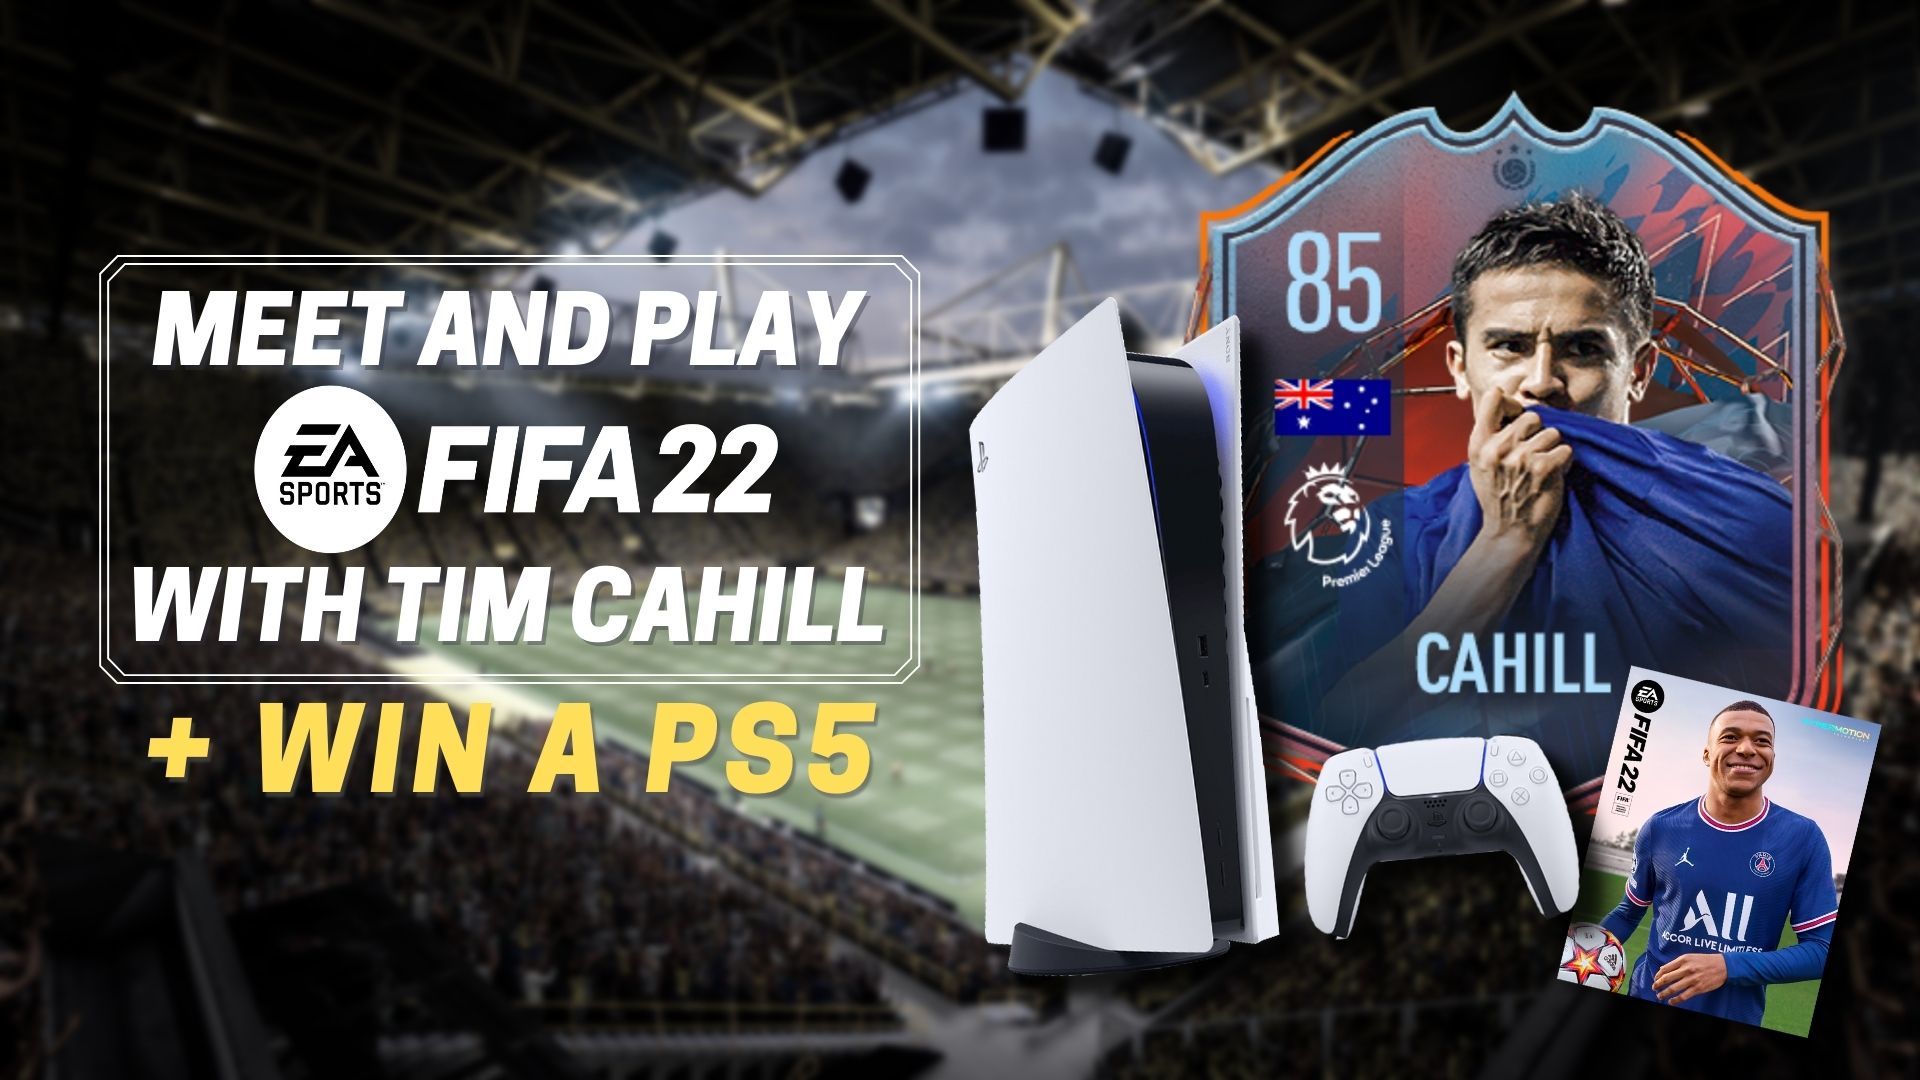 Win a PS5 and play EA Sports' FIFA 22 with Tim Cahill